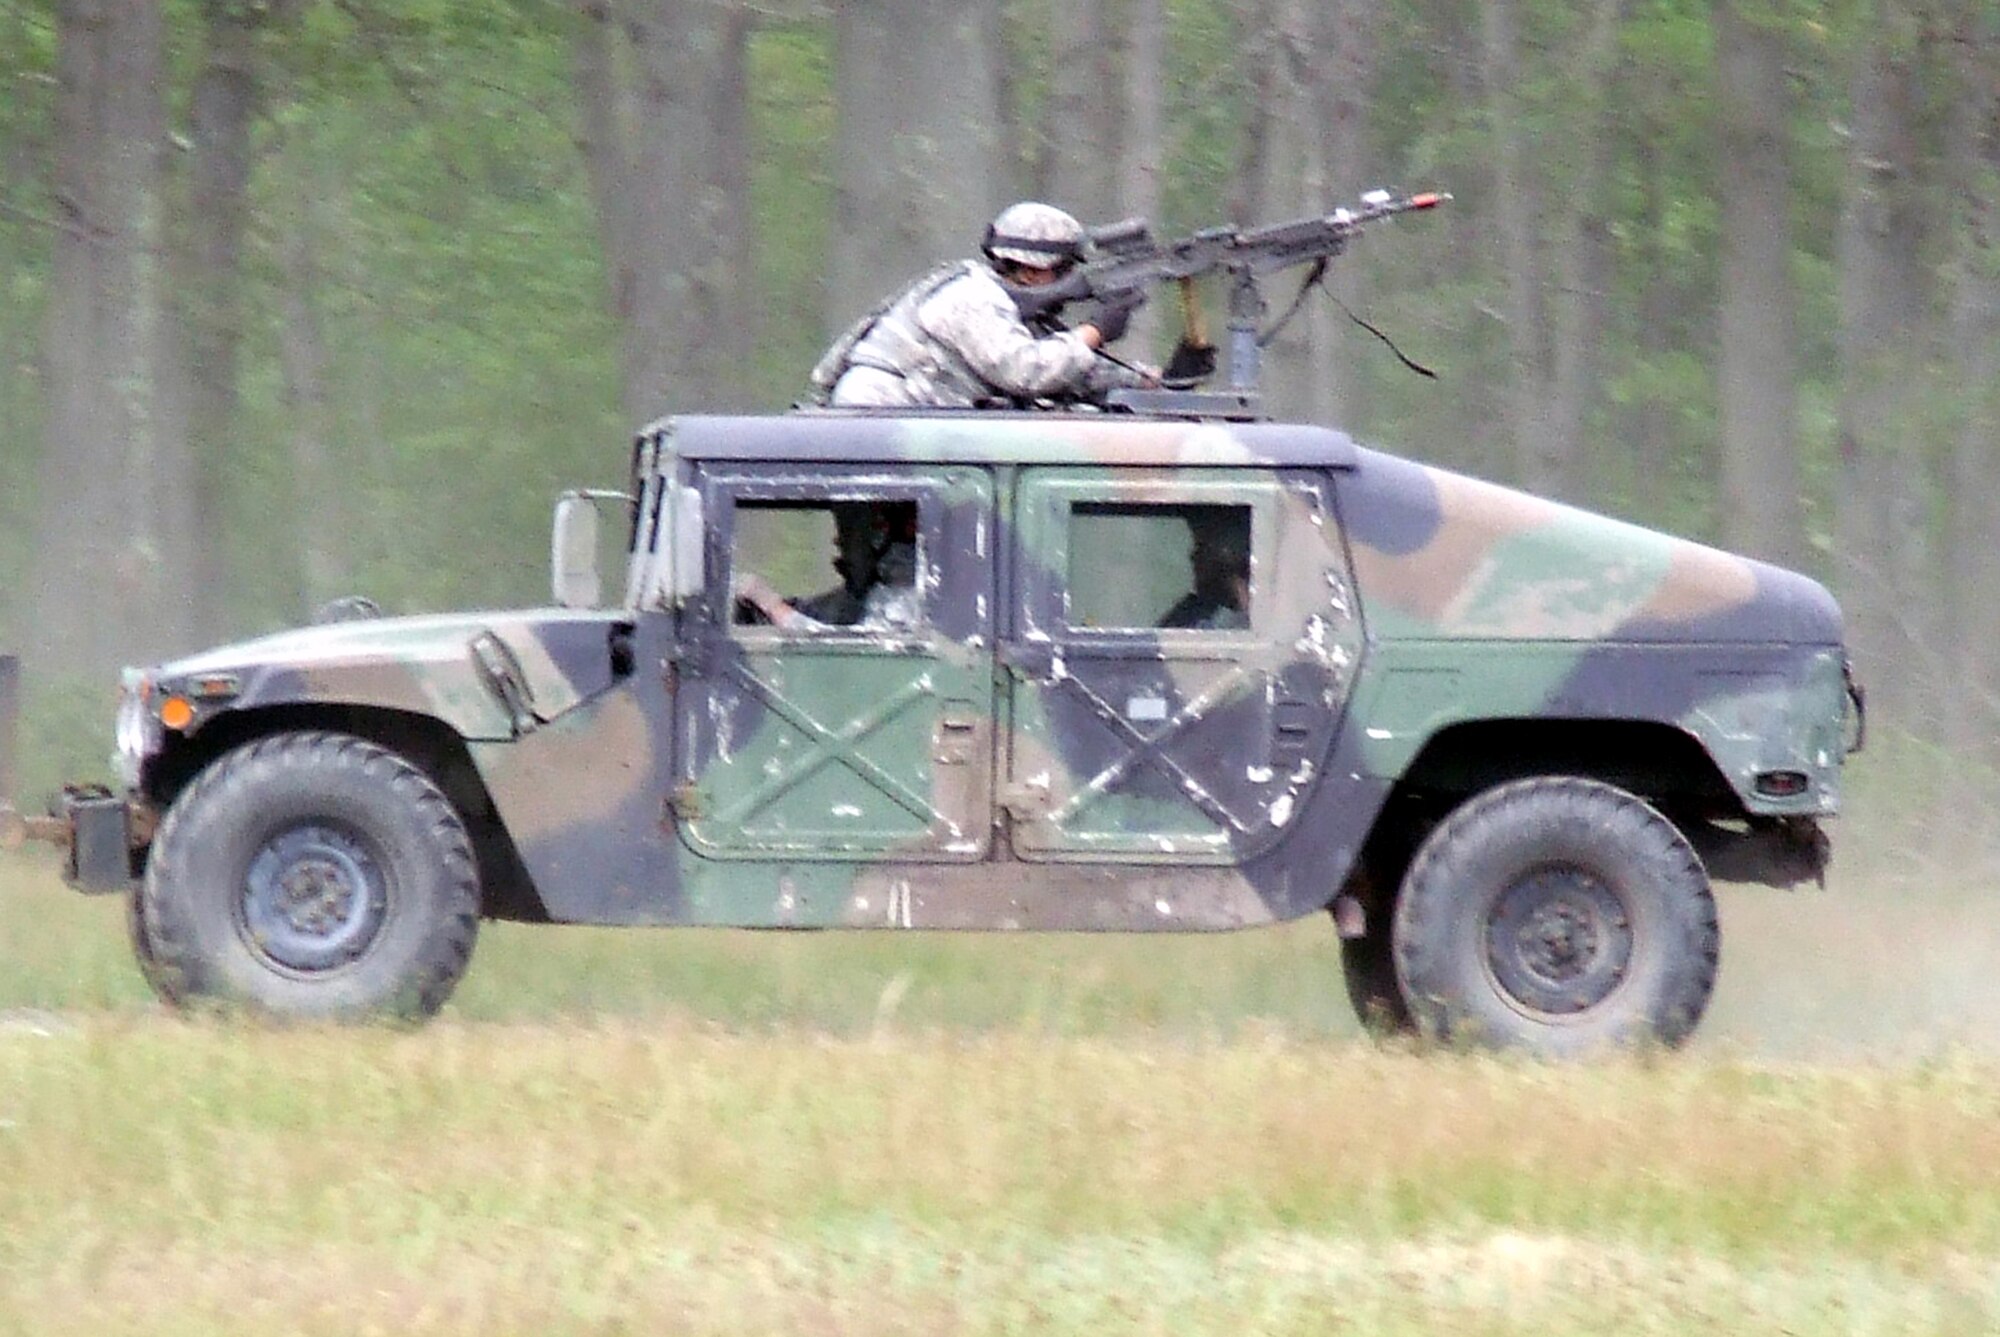 Students in the Air Force Phoenix Warrior Training Course practice convoy operations training June 19, 2008, on a Fort Dix, N.J., range.  The course, taught by the U.S. Air Force Expeditionary Center's Expeditionary Operations School and the 421st Combat Training Squadron, prepares security forces Airmen for upcoming deployments.  (U.S. Air Force Photo/Tech. Sgt. Scott T. Sturkol)